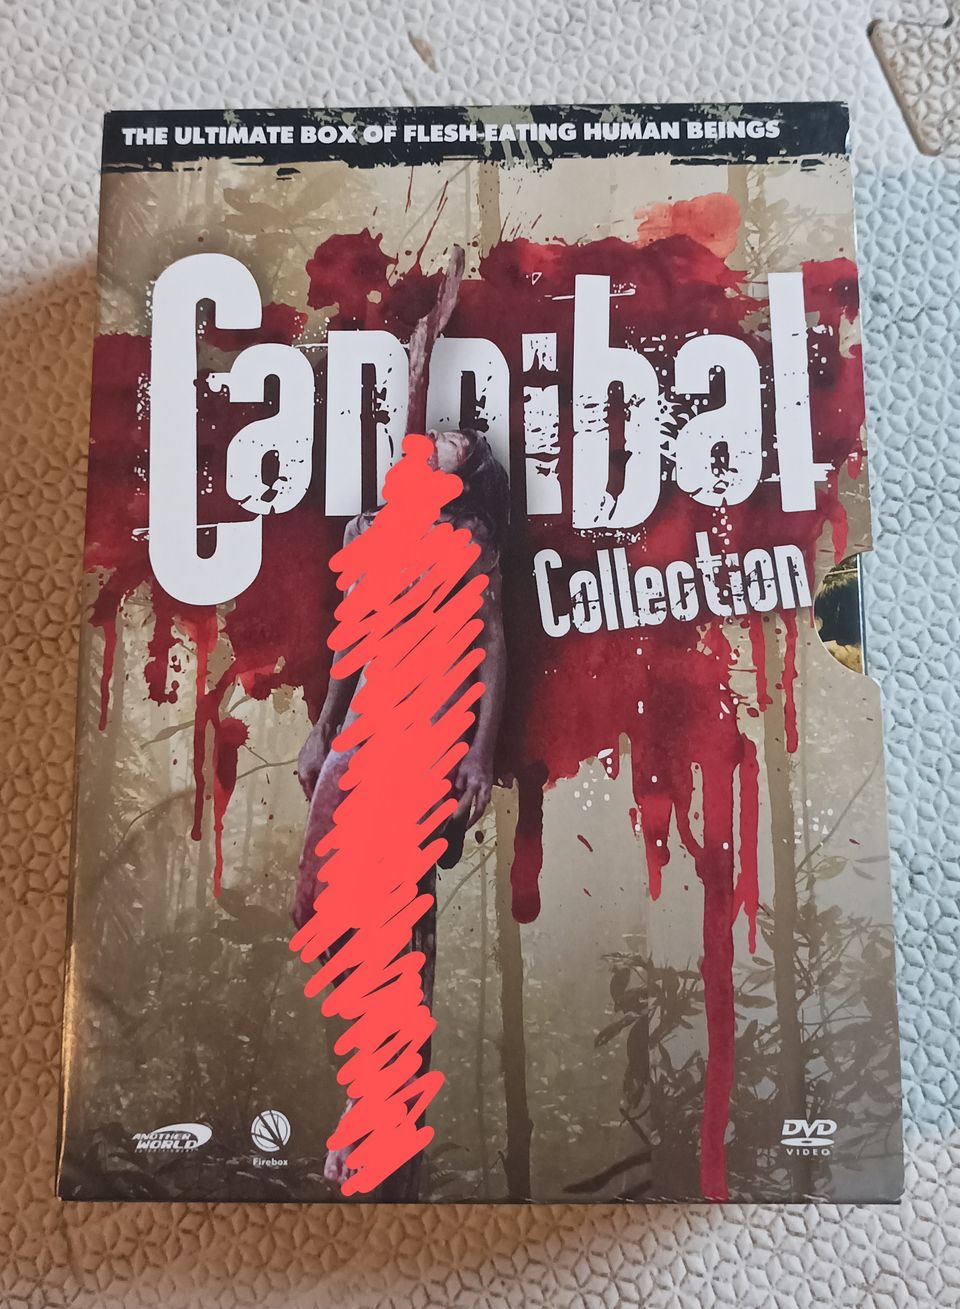 Cannibal collection